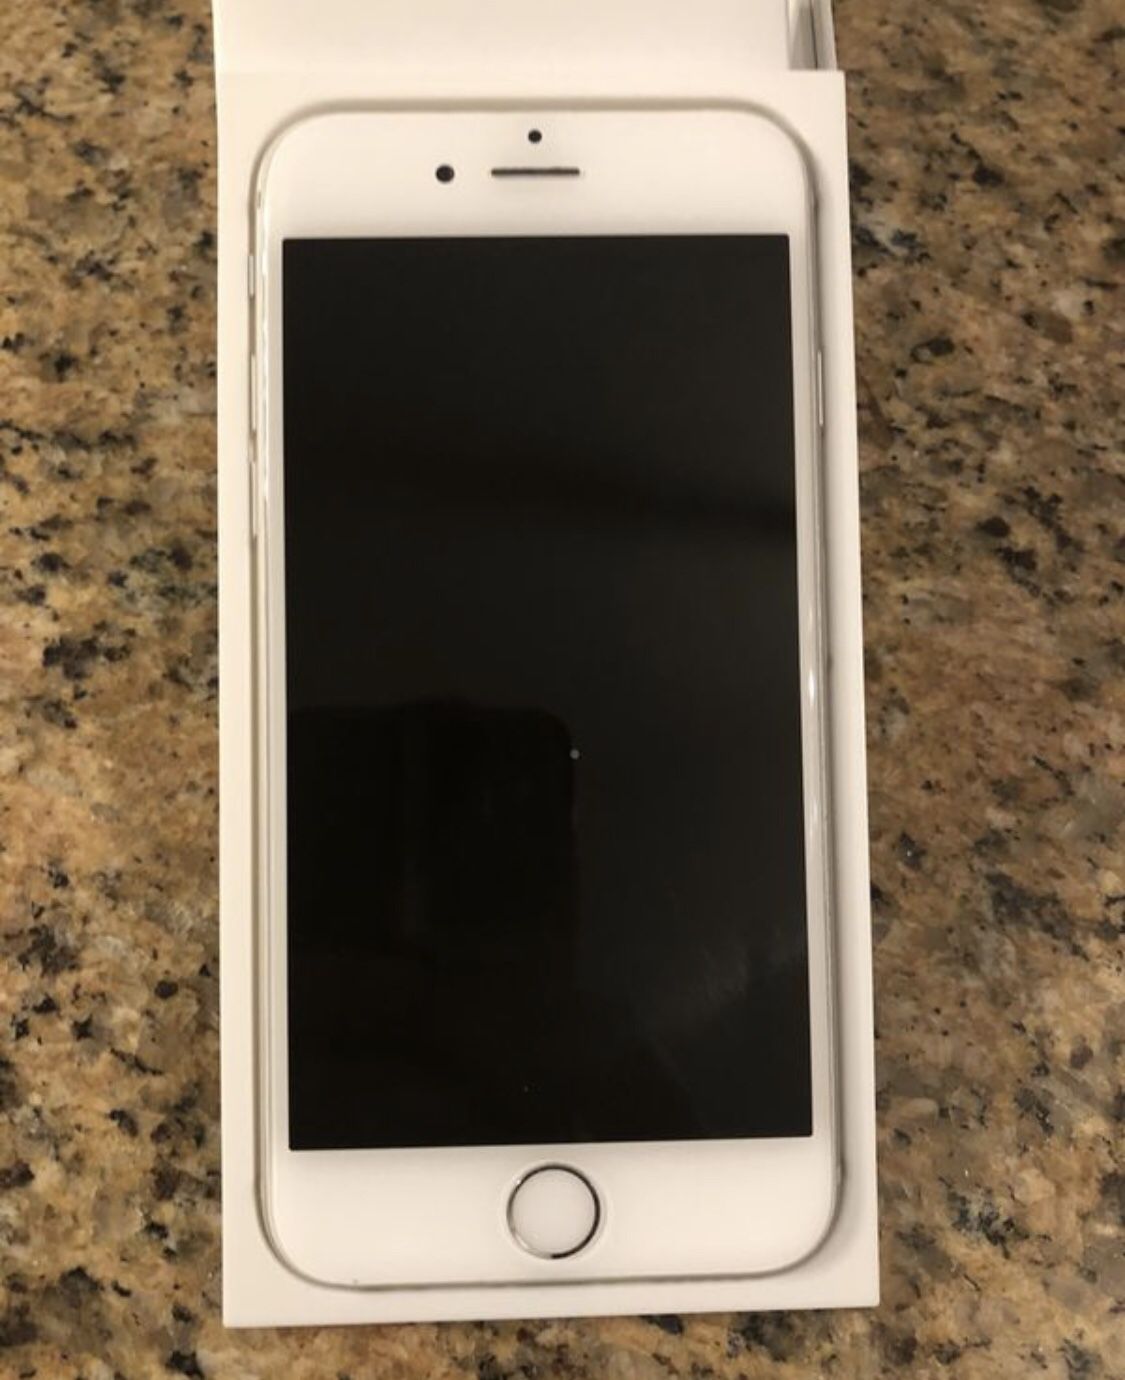 Skærm Formålet Forbindelse Apple iPhone 6 Silver 16 GB UNLOCKED Box and accessories included for Sale  in Puyallup, WA - OfferUp